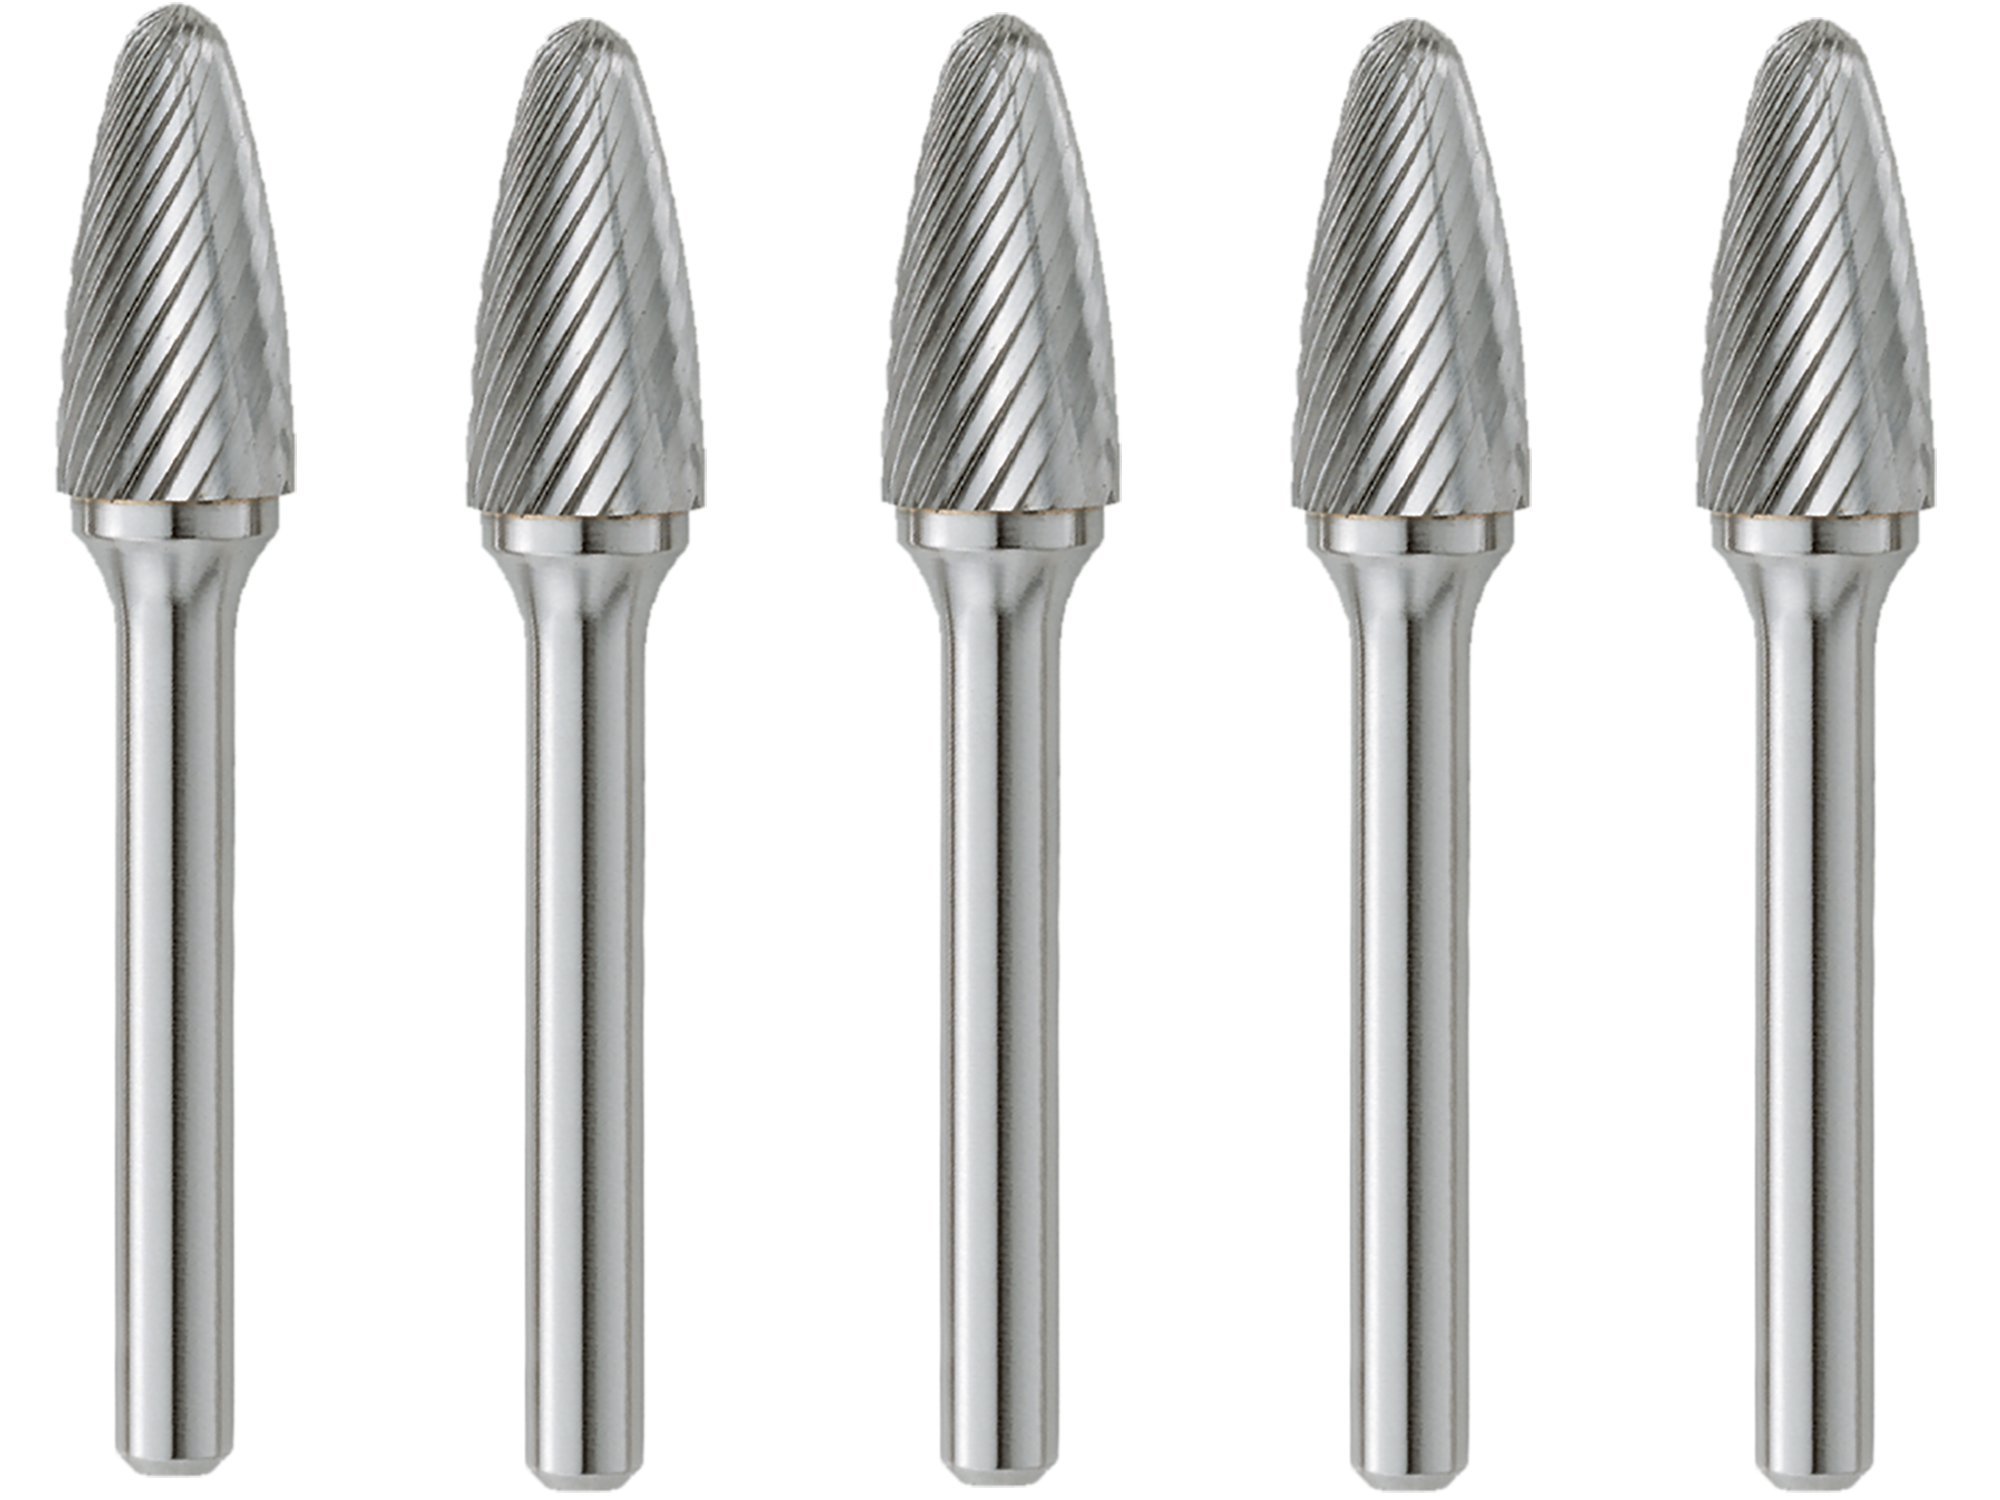 SF-15 Burr (5 Pack) 3/4" x 1-1/2" Cut Length x 2-1/2" OAL on 1/4" Shanks - The End Mill Store 